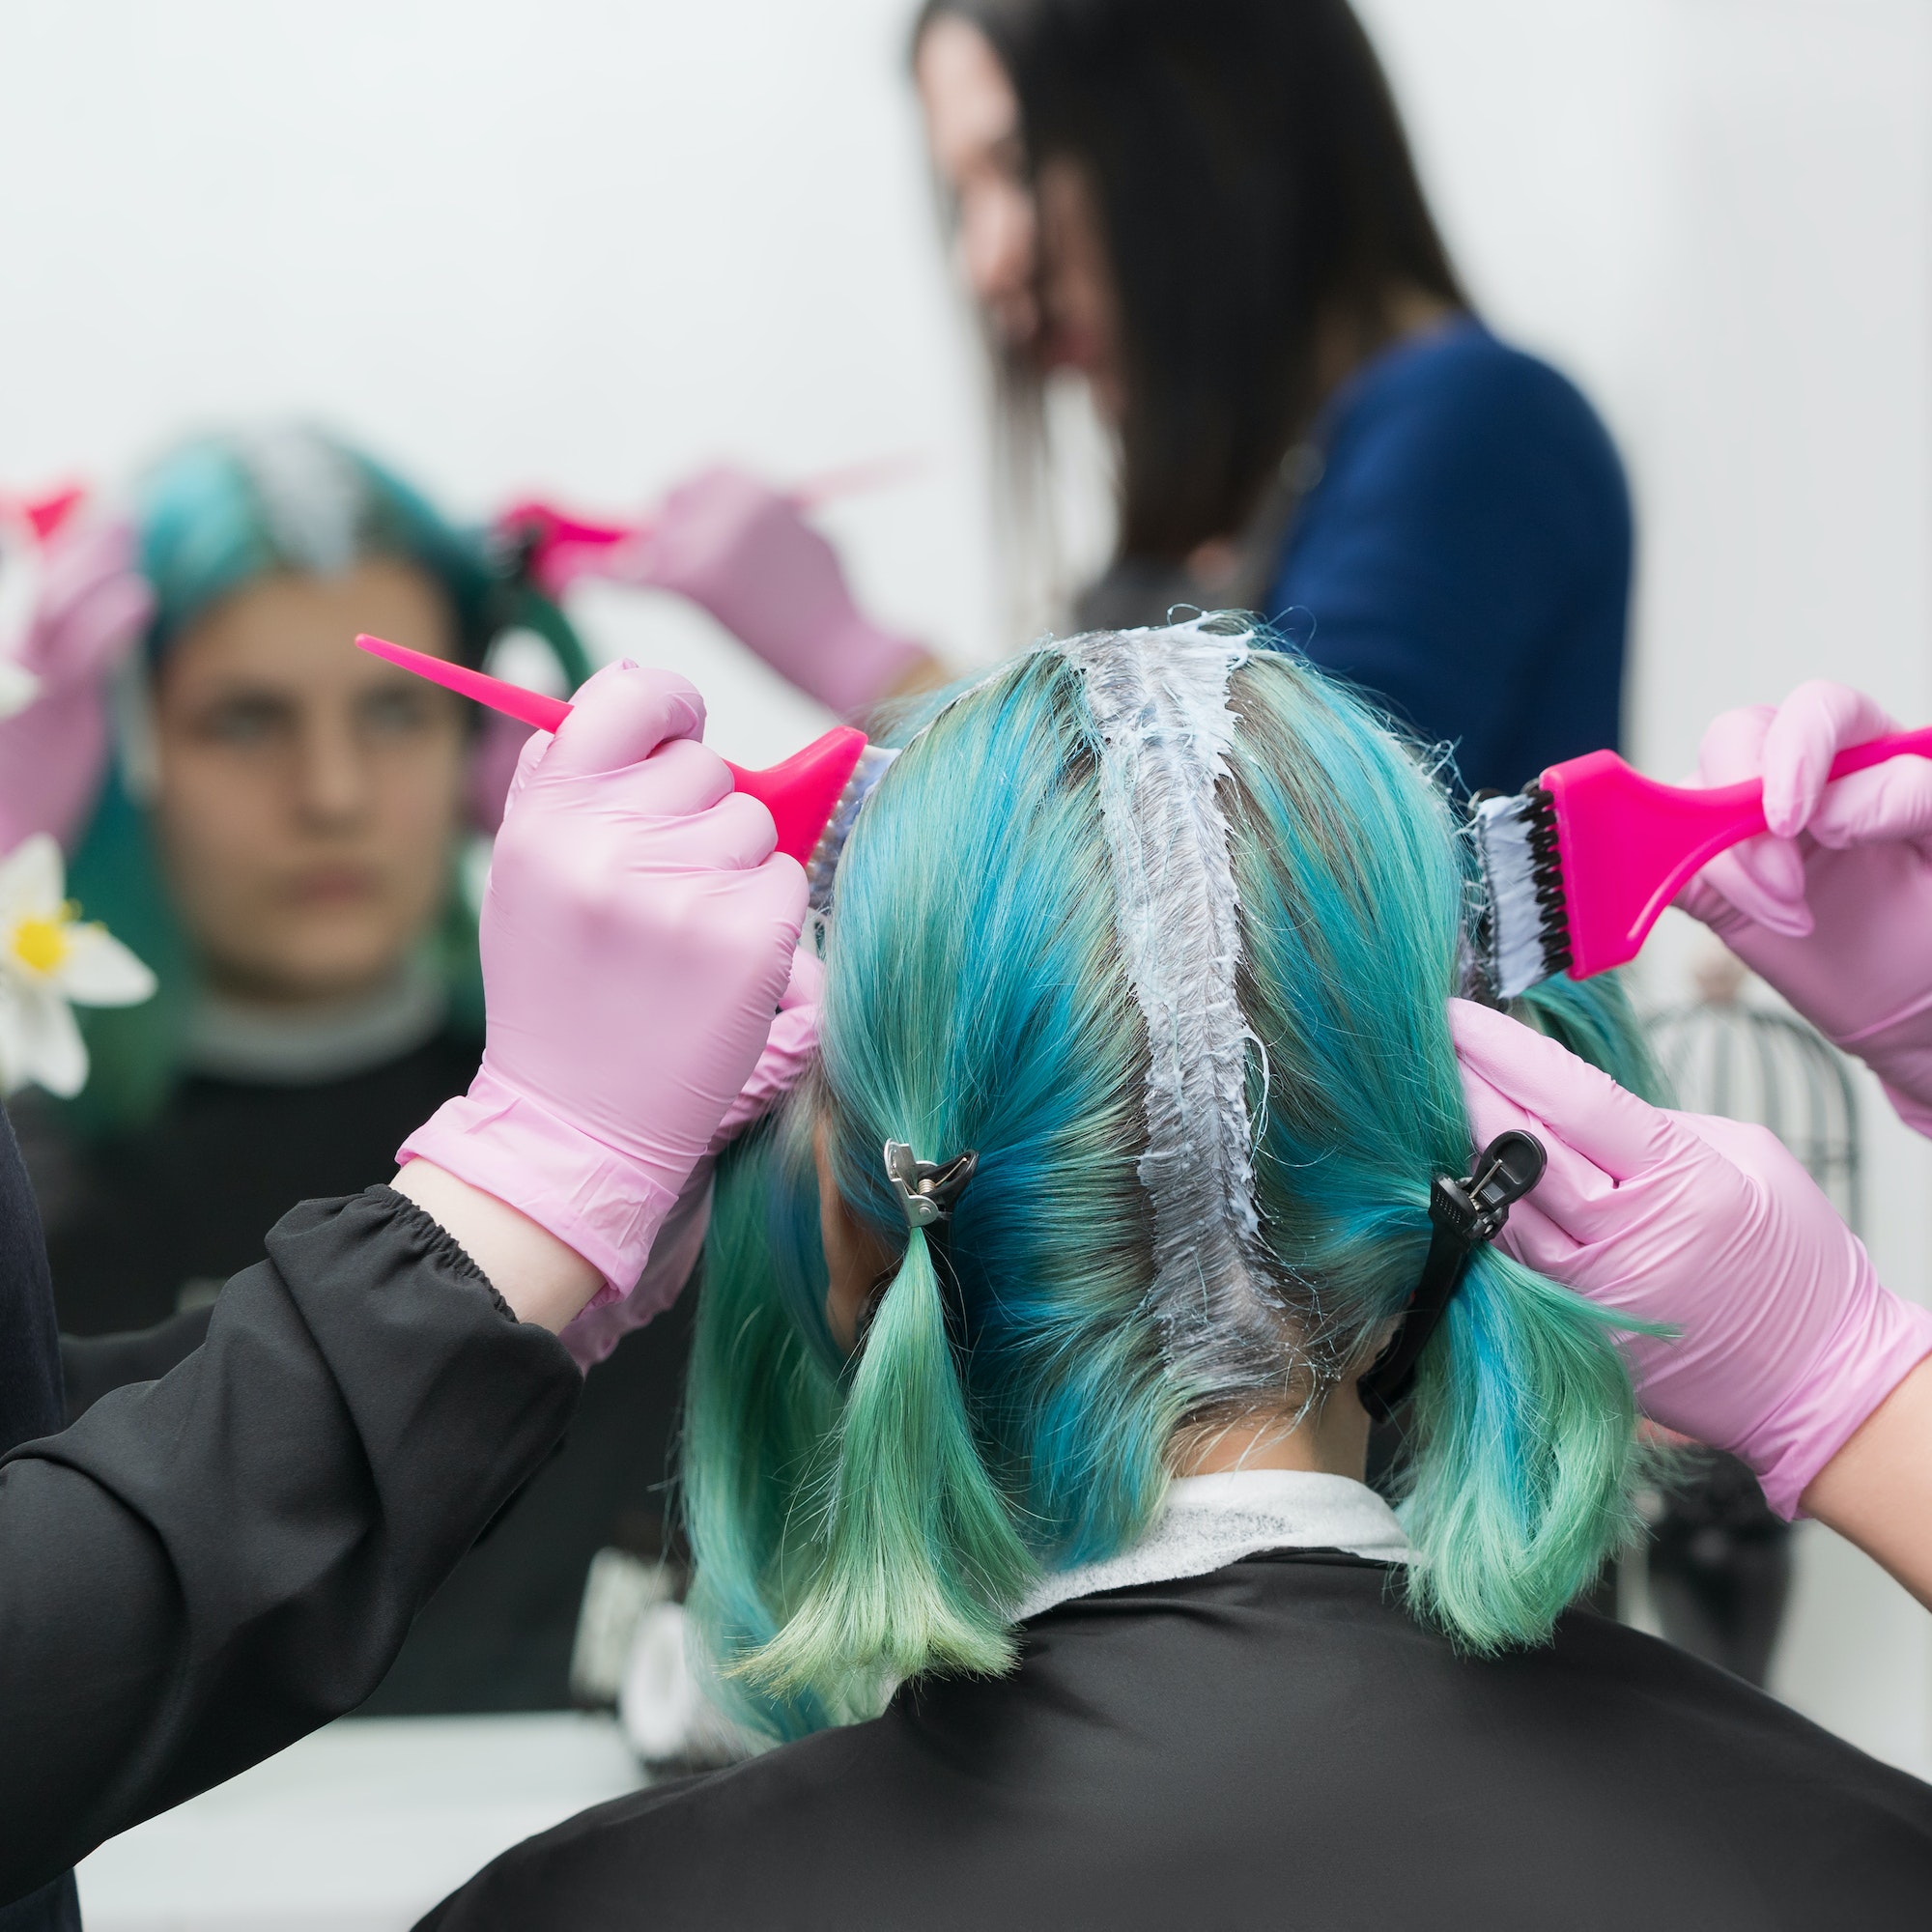 Process of hair dyeing in salon. Two hairdressers applying paint to hair during bleaching hair roots